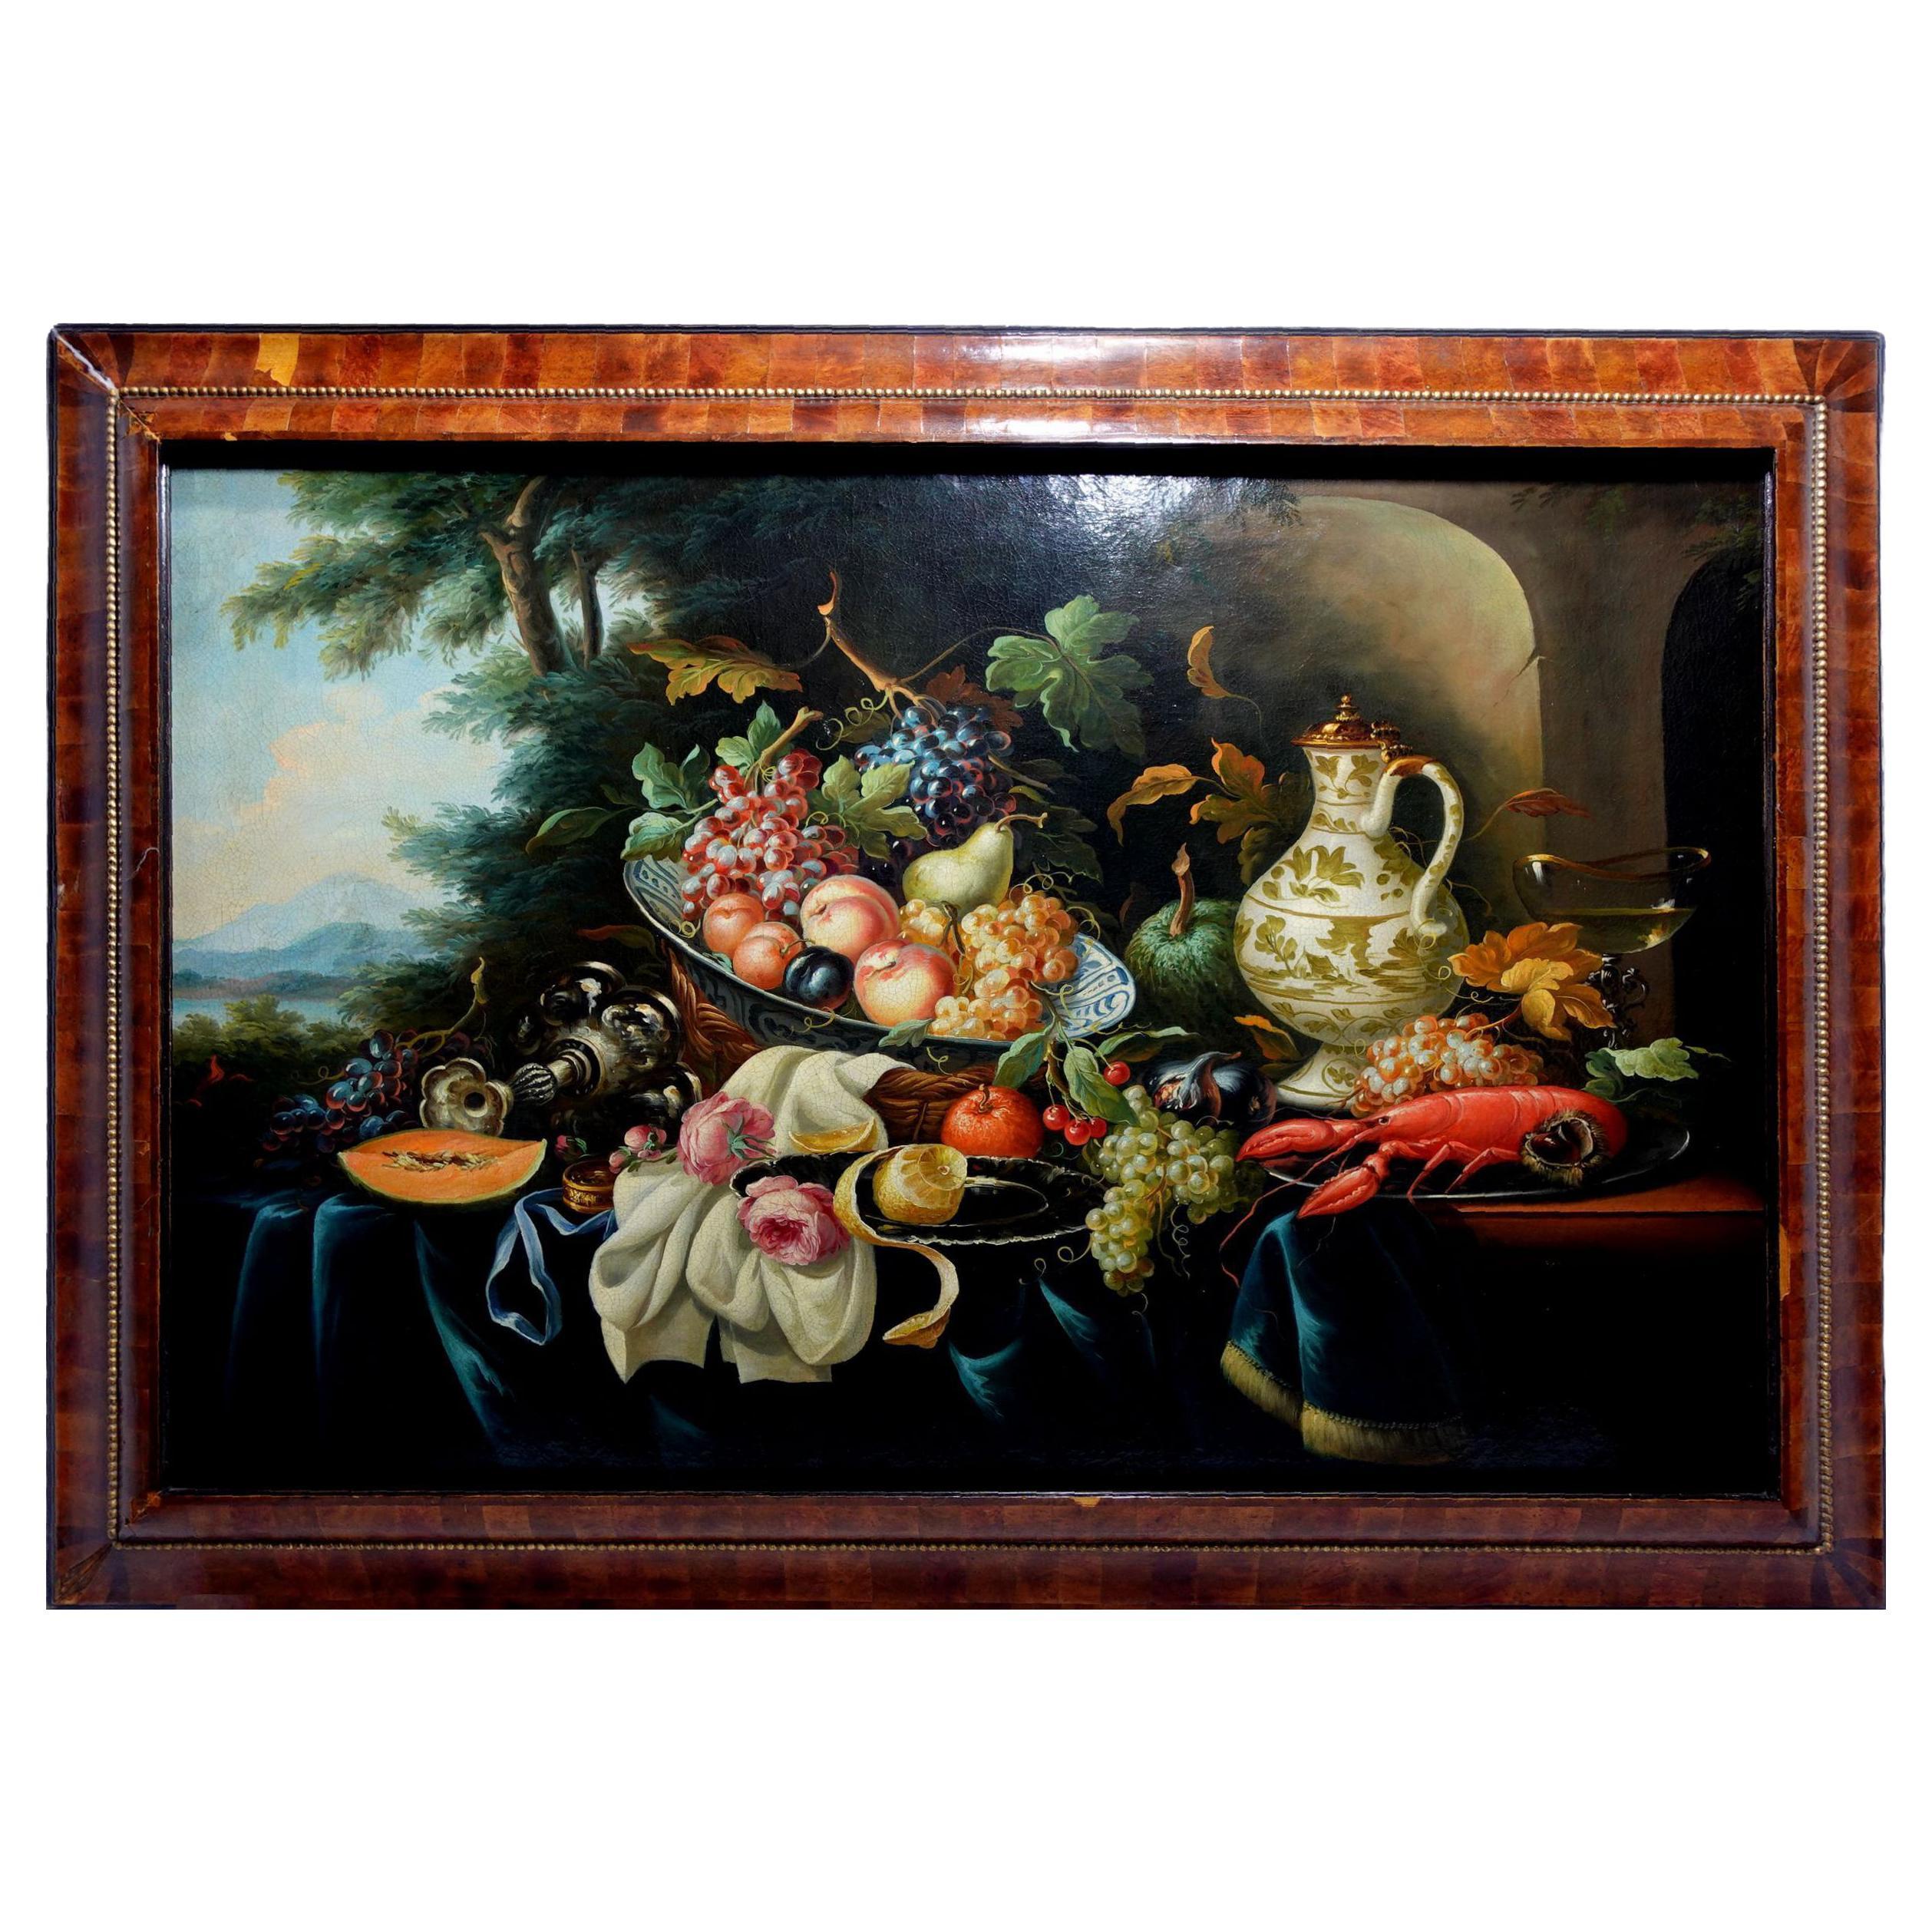 Antique Large Dutch School Old Master "Still Life" Oil Painting, 18th Century